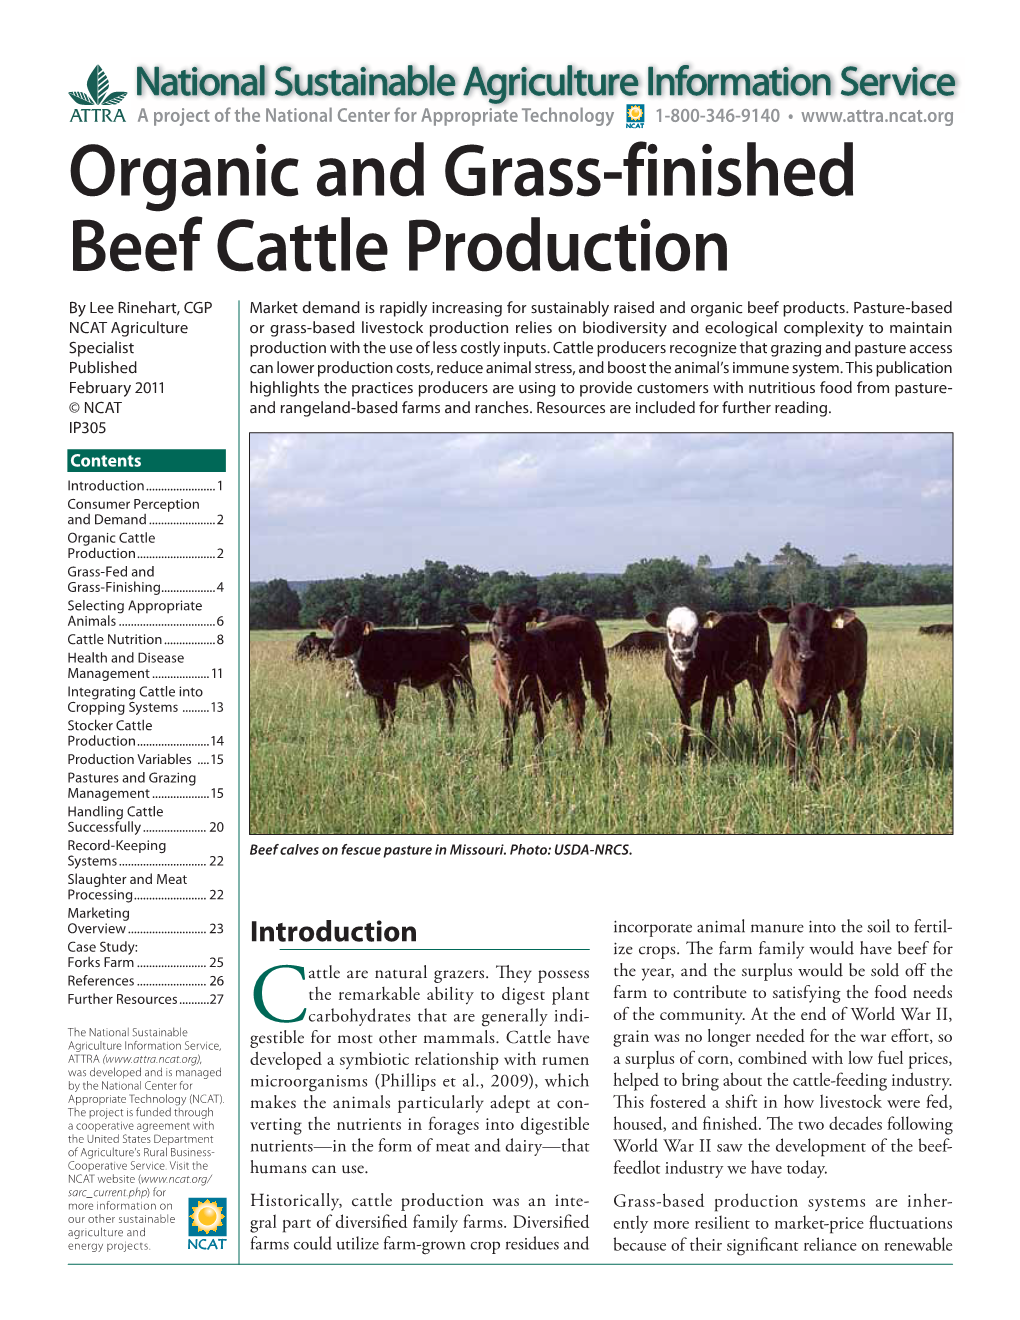 Organic and Grass-F Inished Beef Cattle Production by Lee Rinehart, CGP Market Demand Is Rapidly Increasing for Sustainably Raised and Organic Beef Products